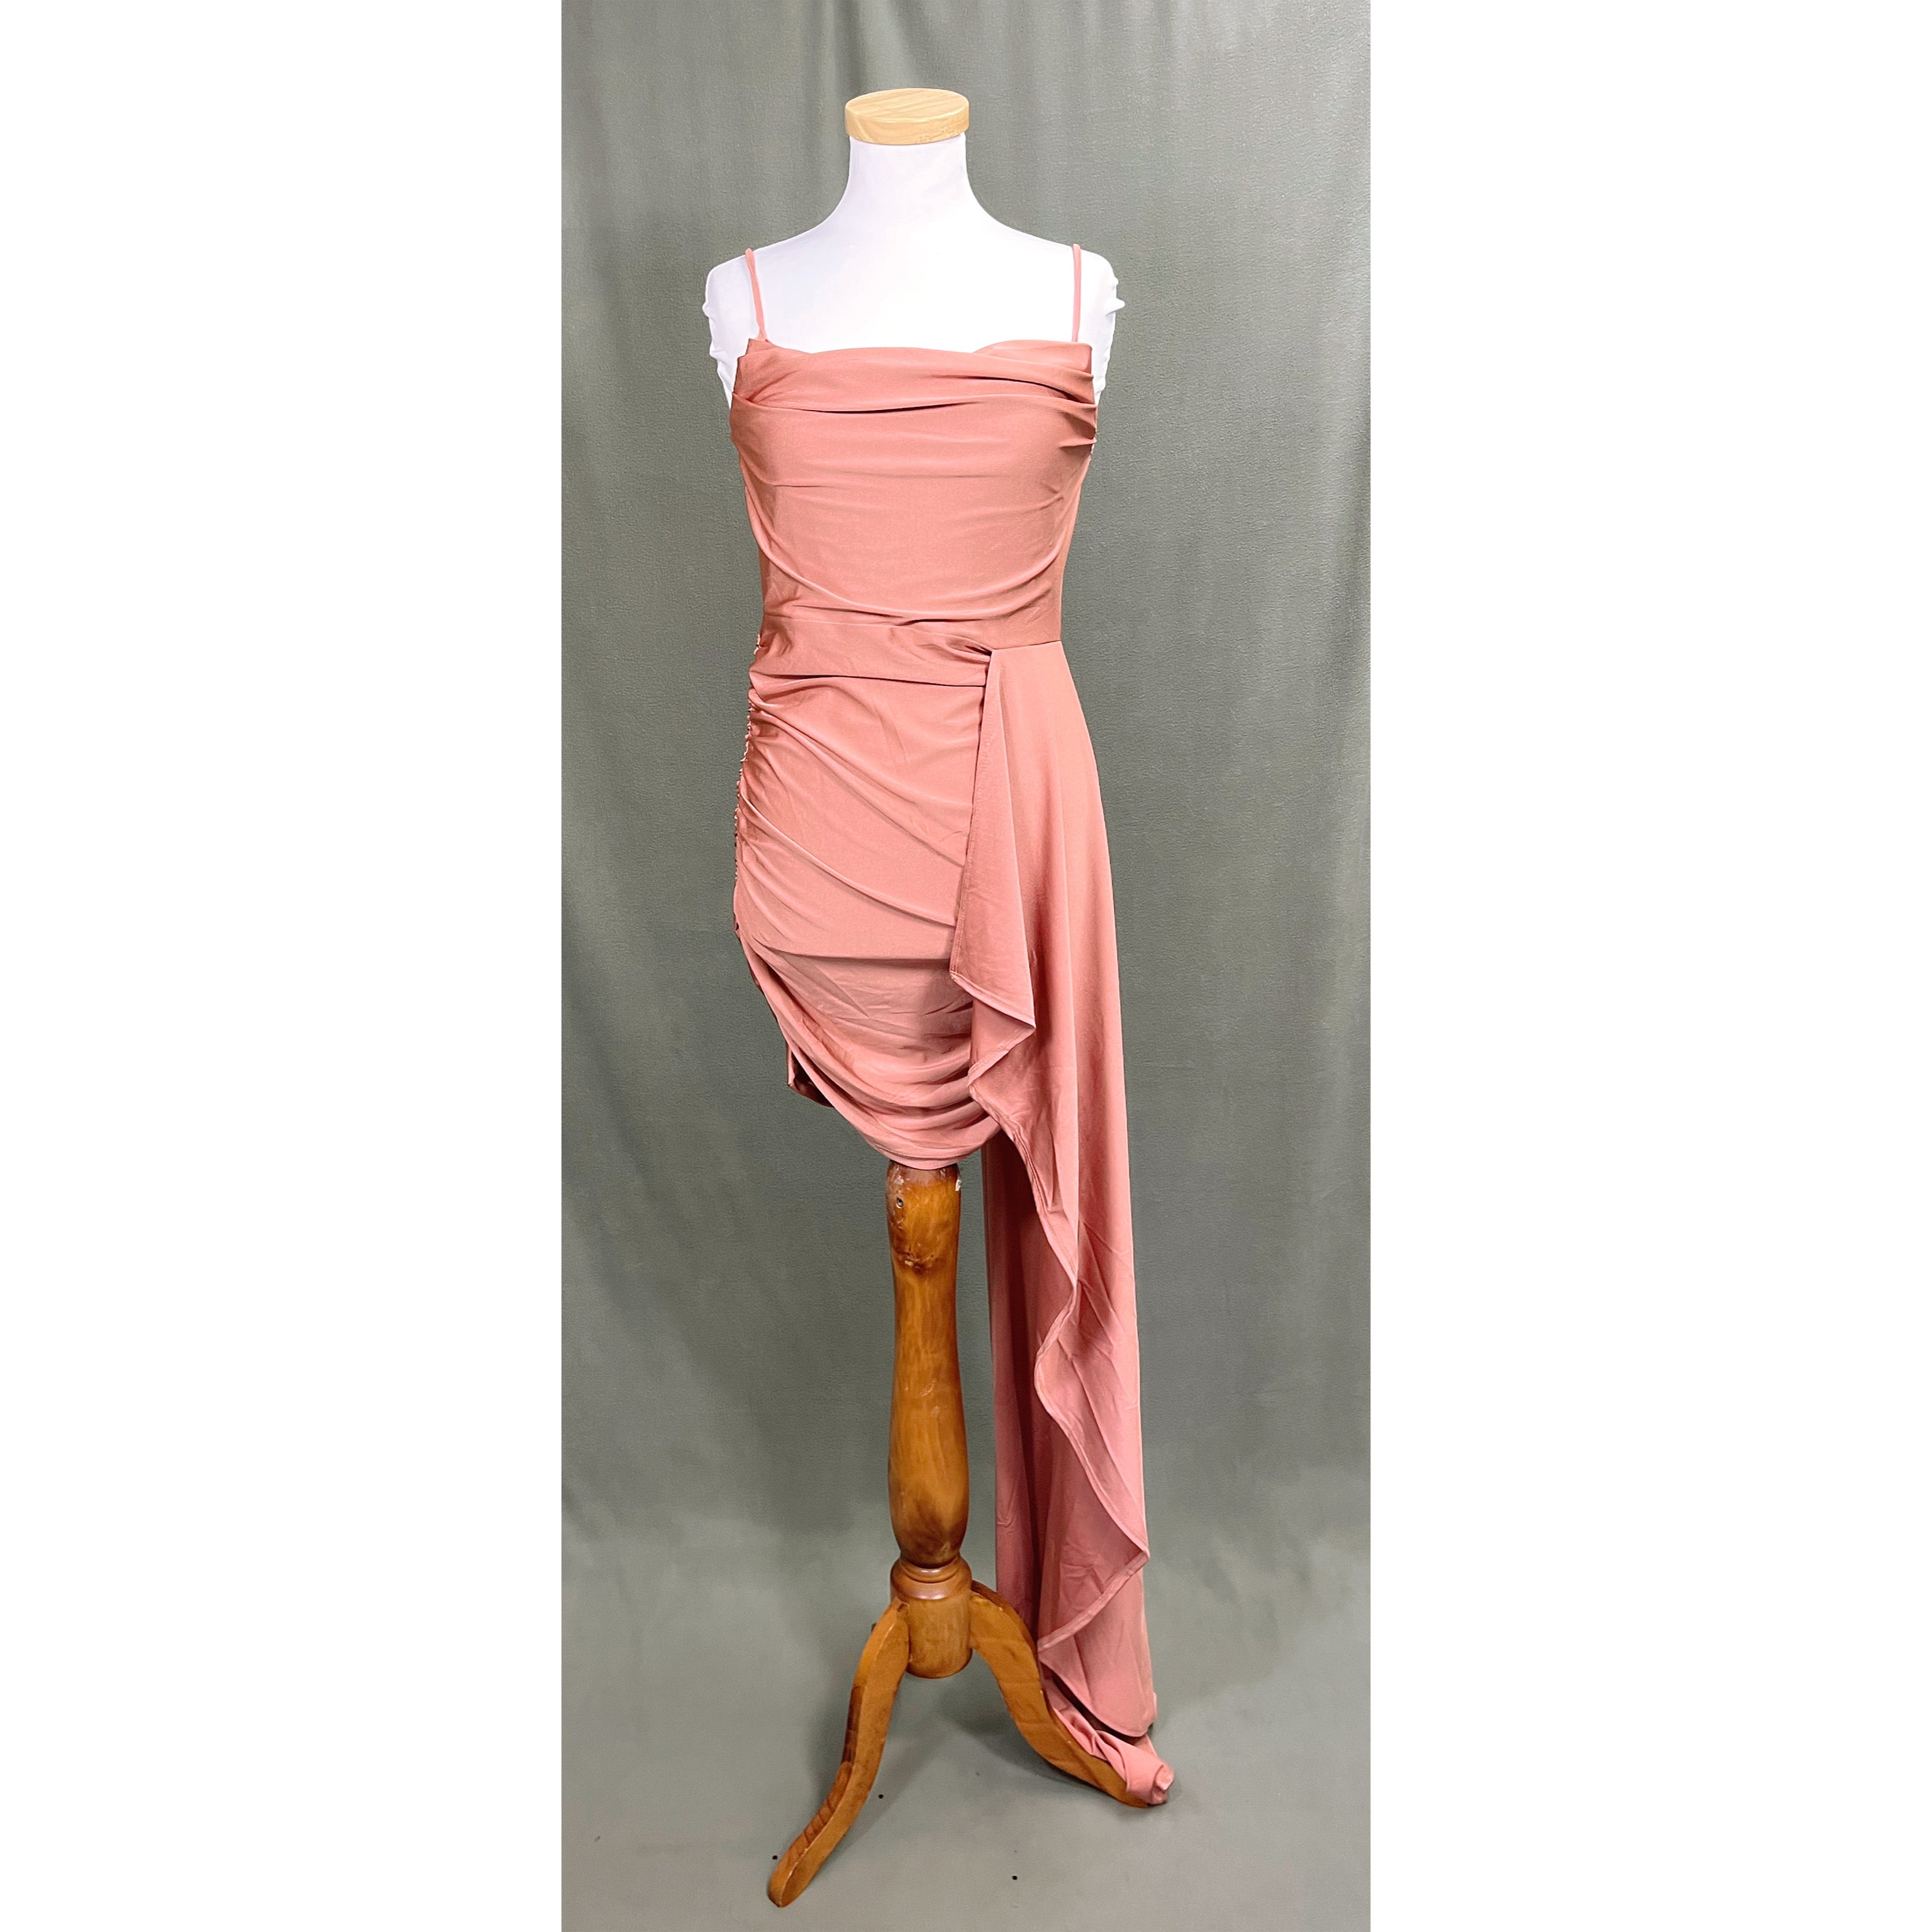 Cefian blush short dress with train, sizes S, M, and L, NEW WITH TAGS!